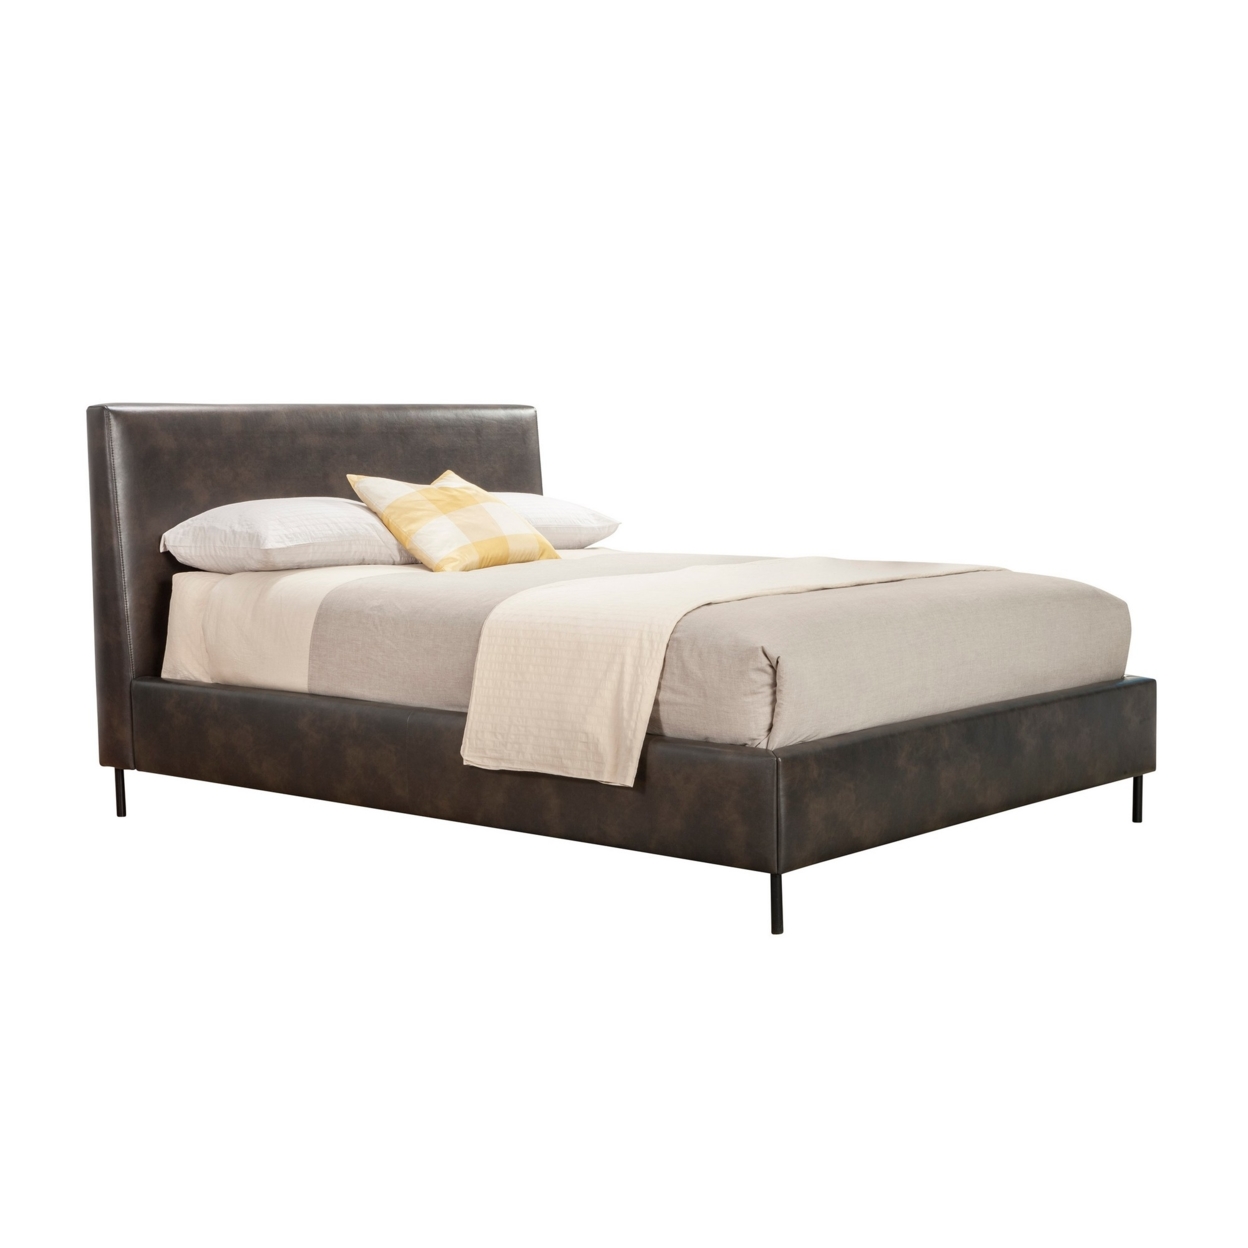 Faux Leather Upholstered Full Bed With Metal Legs, Gray- Saltoro Sherpi